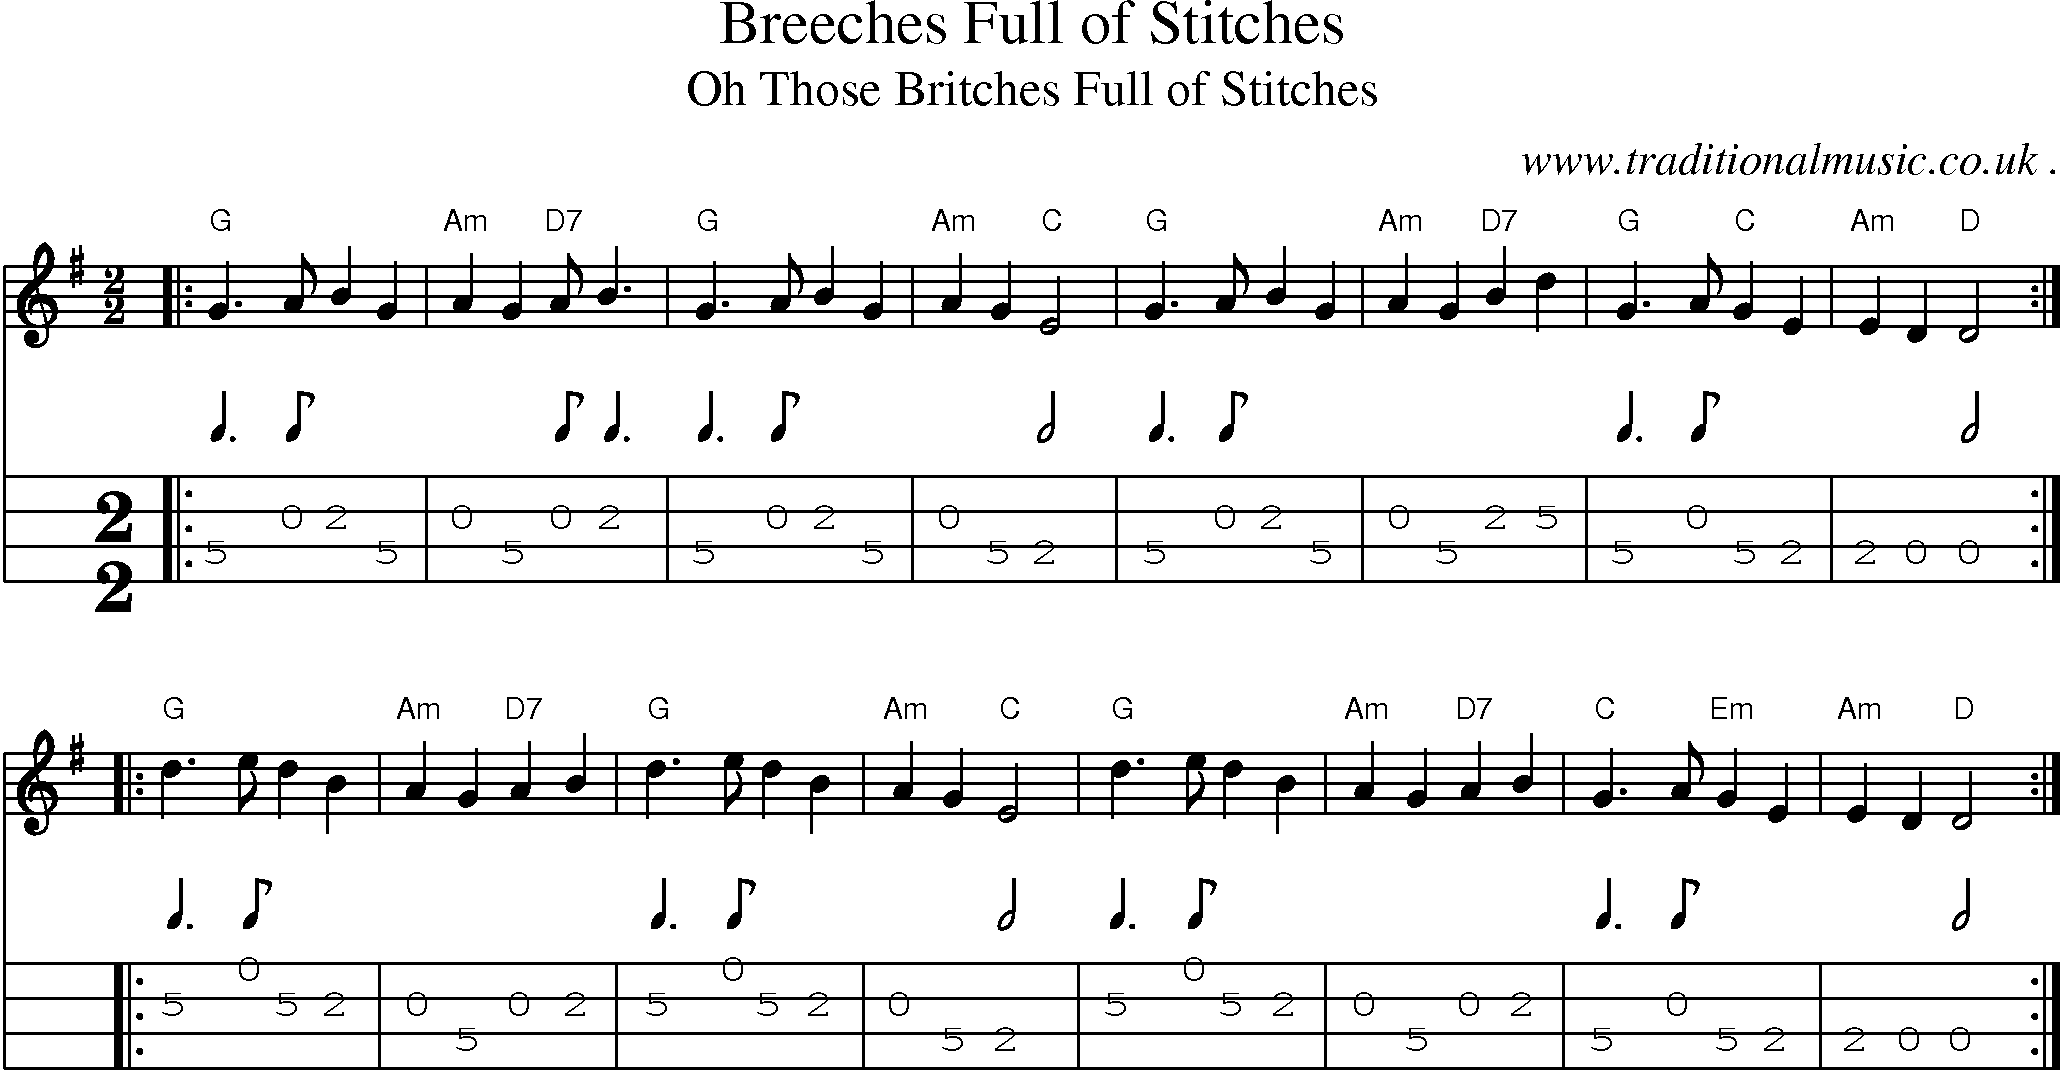 Music Score and Mandolin Tabs for Breeches Full Of Stitches